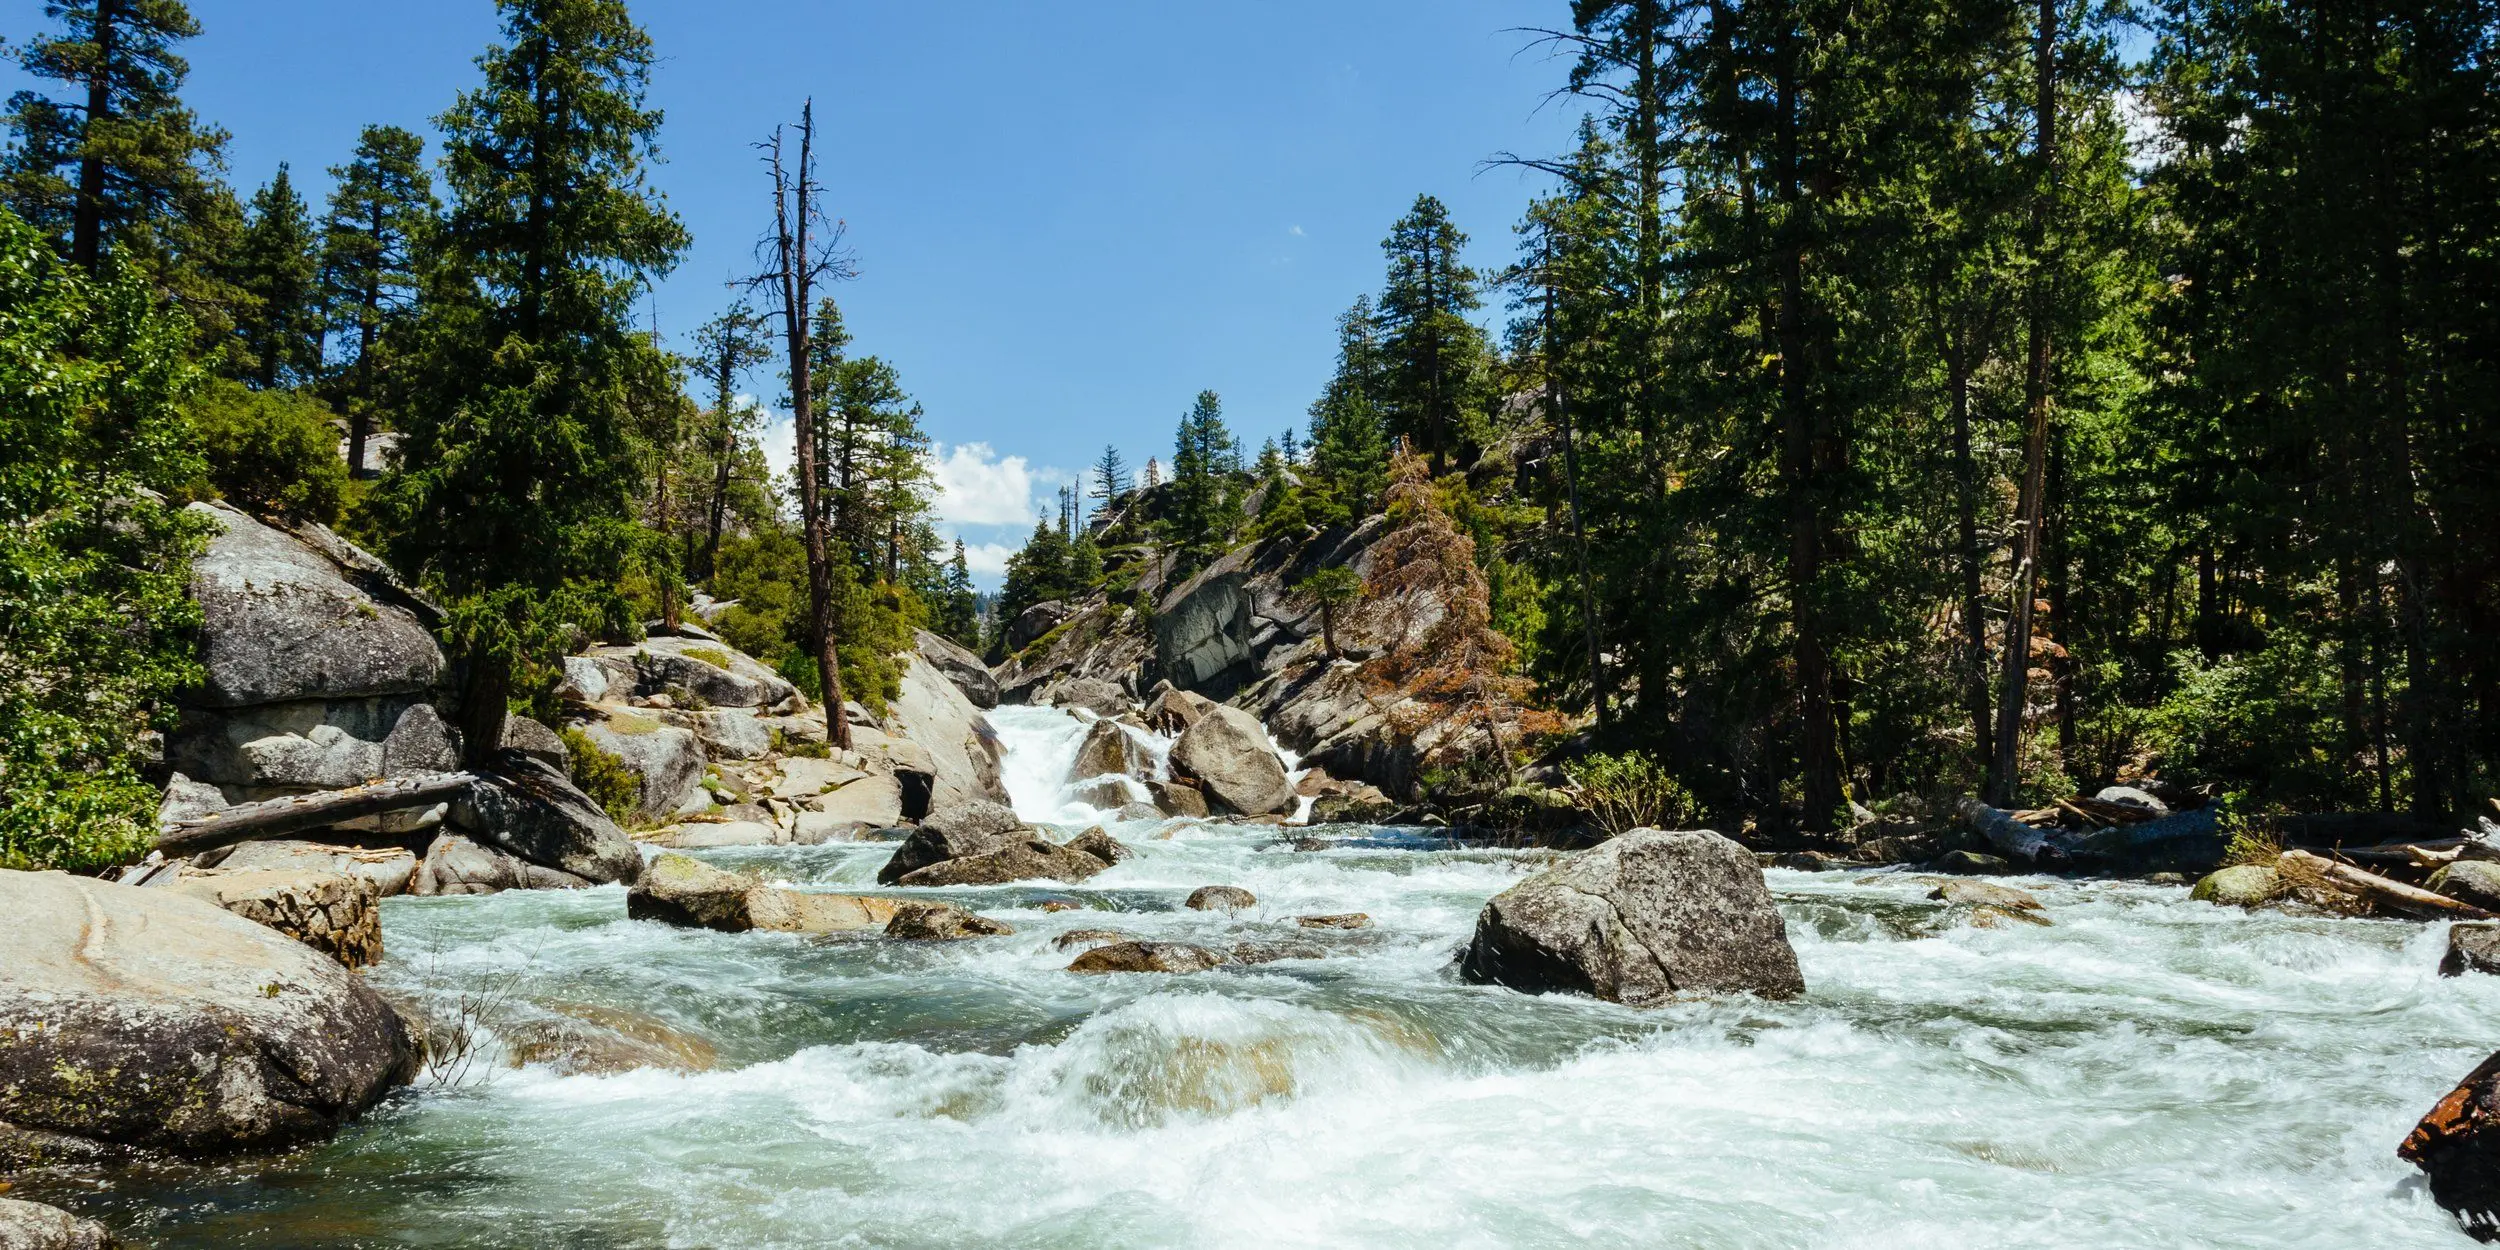 Water from the Merced River rushes over rocks surrounded by trees and clear blue skies during midday.